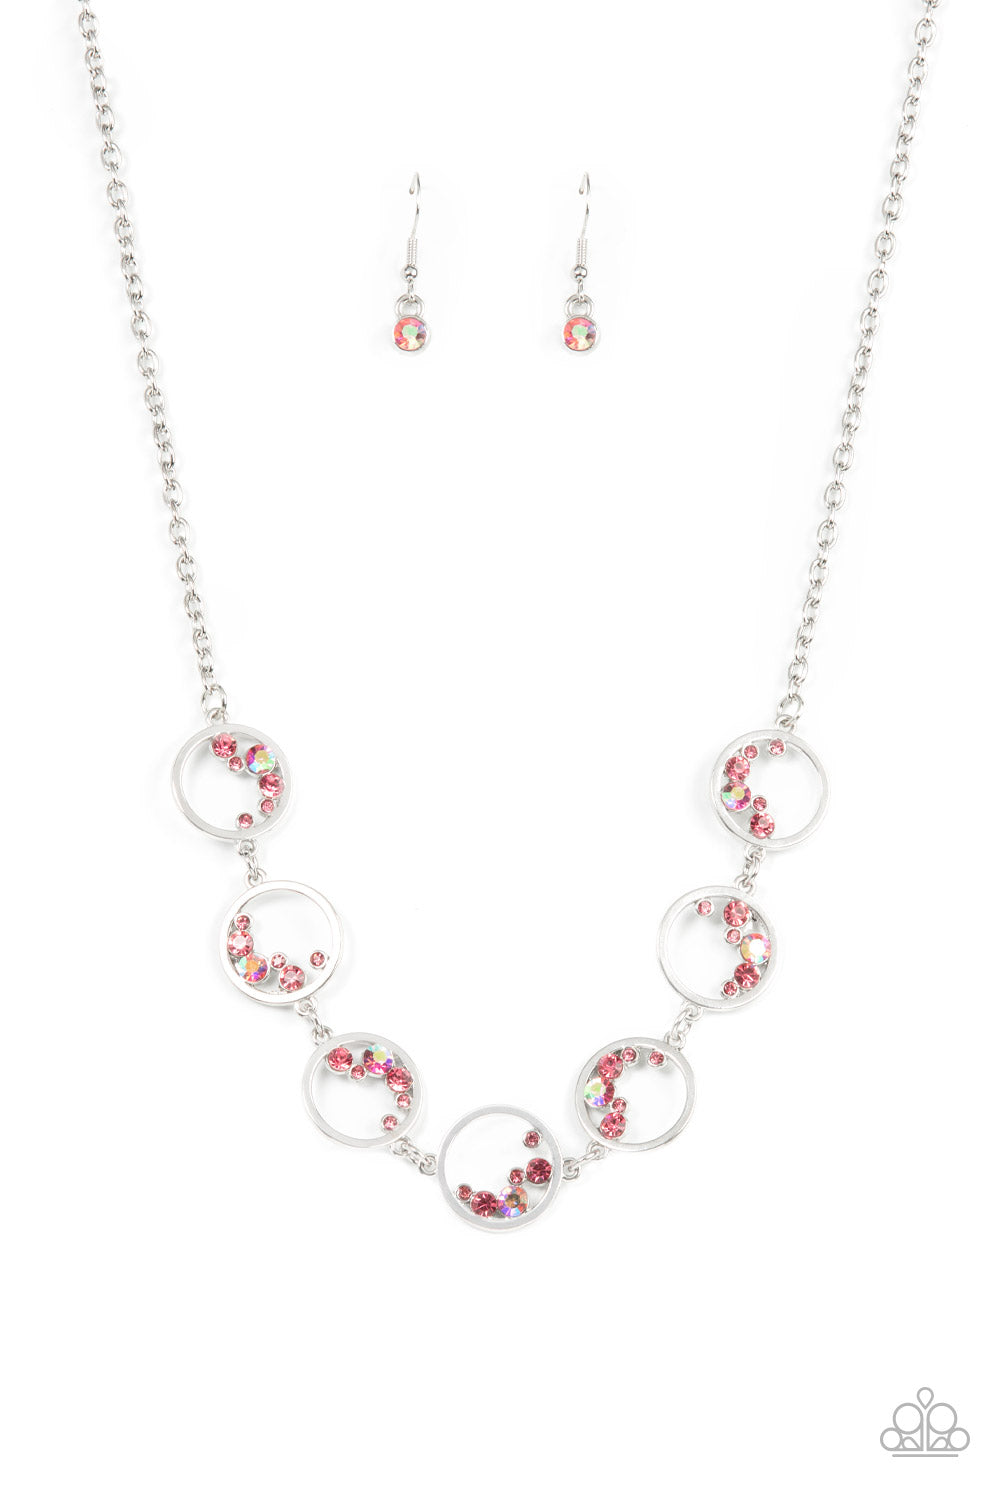 five-dollar-jewelry-blissfully-bubbly-pink-necklace-paparazzi-accessories